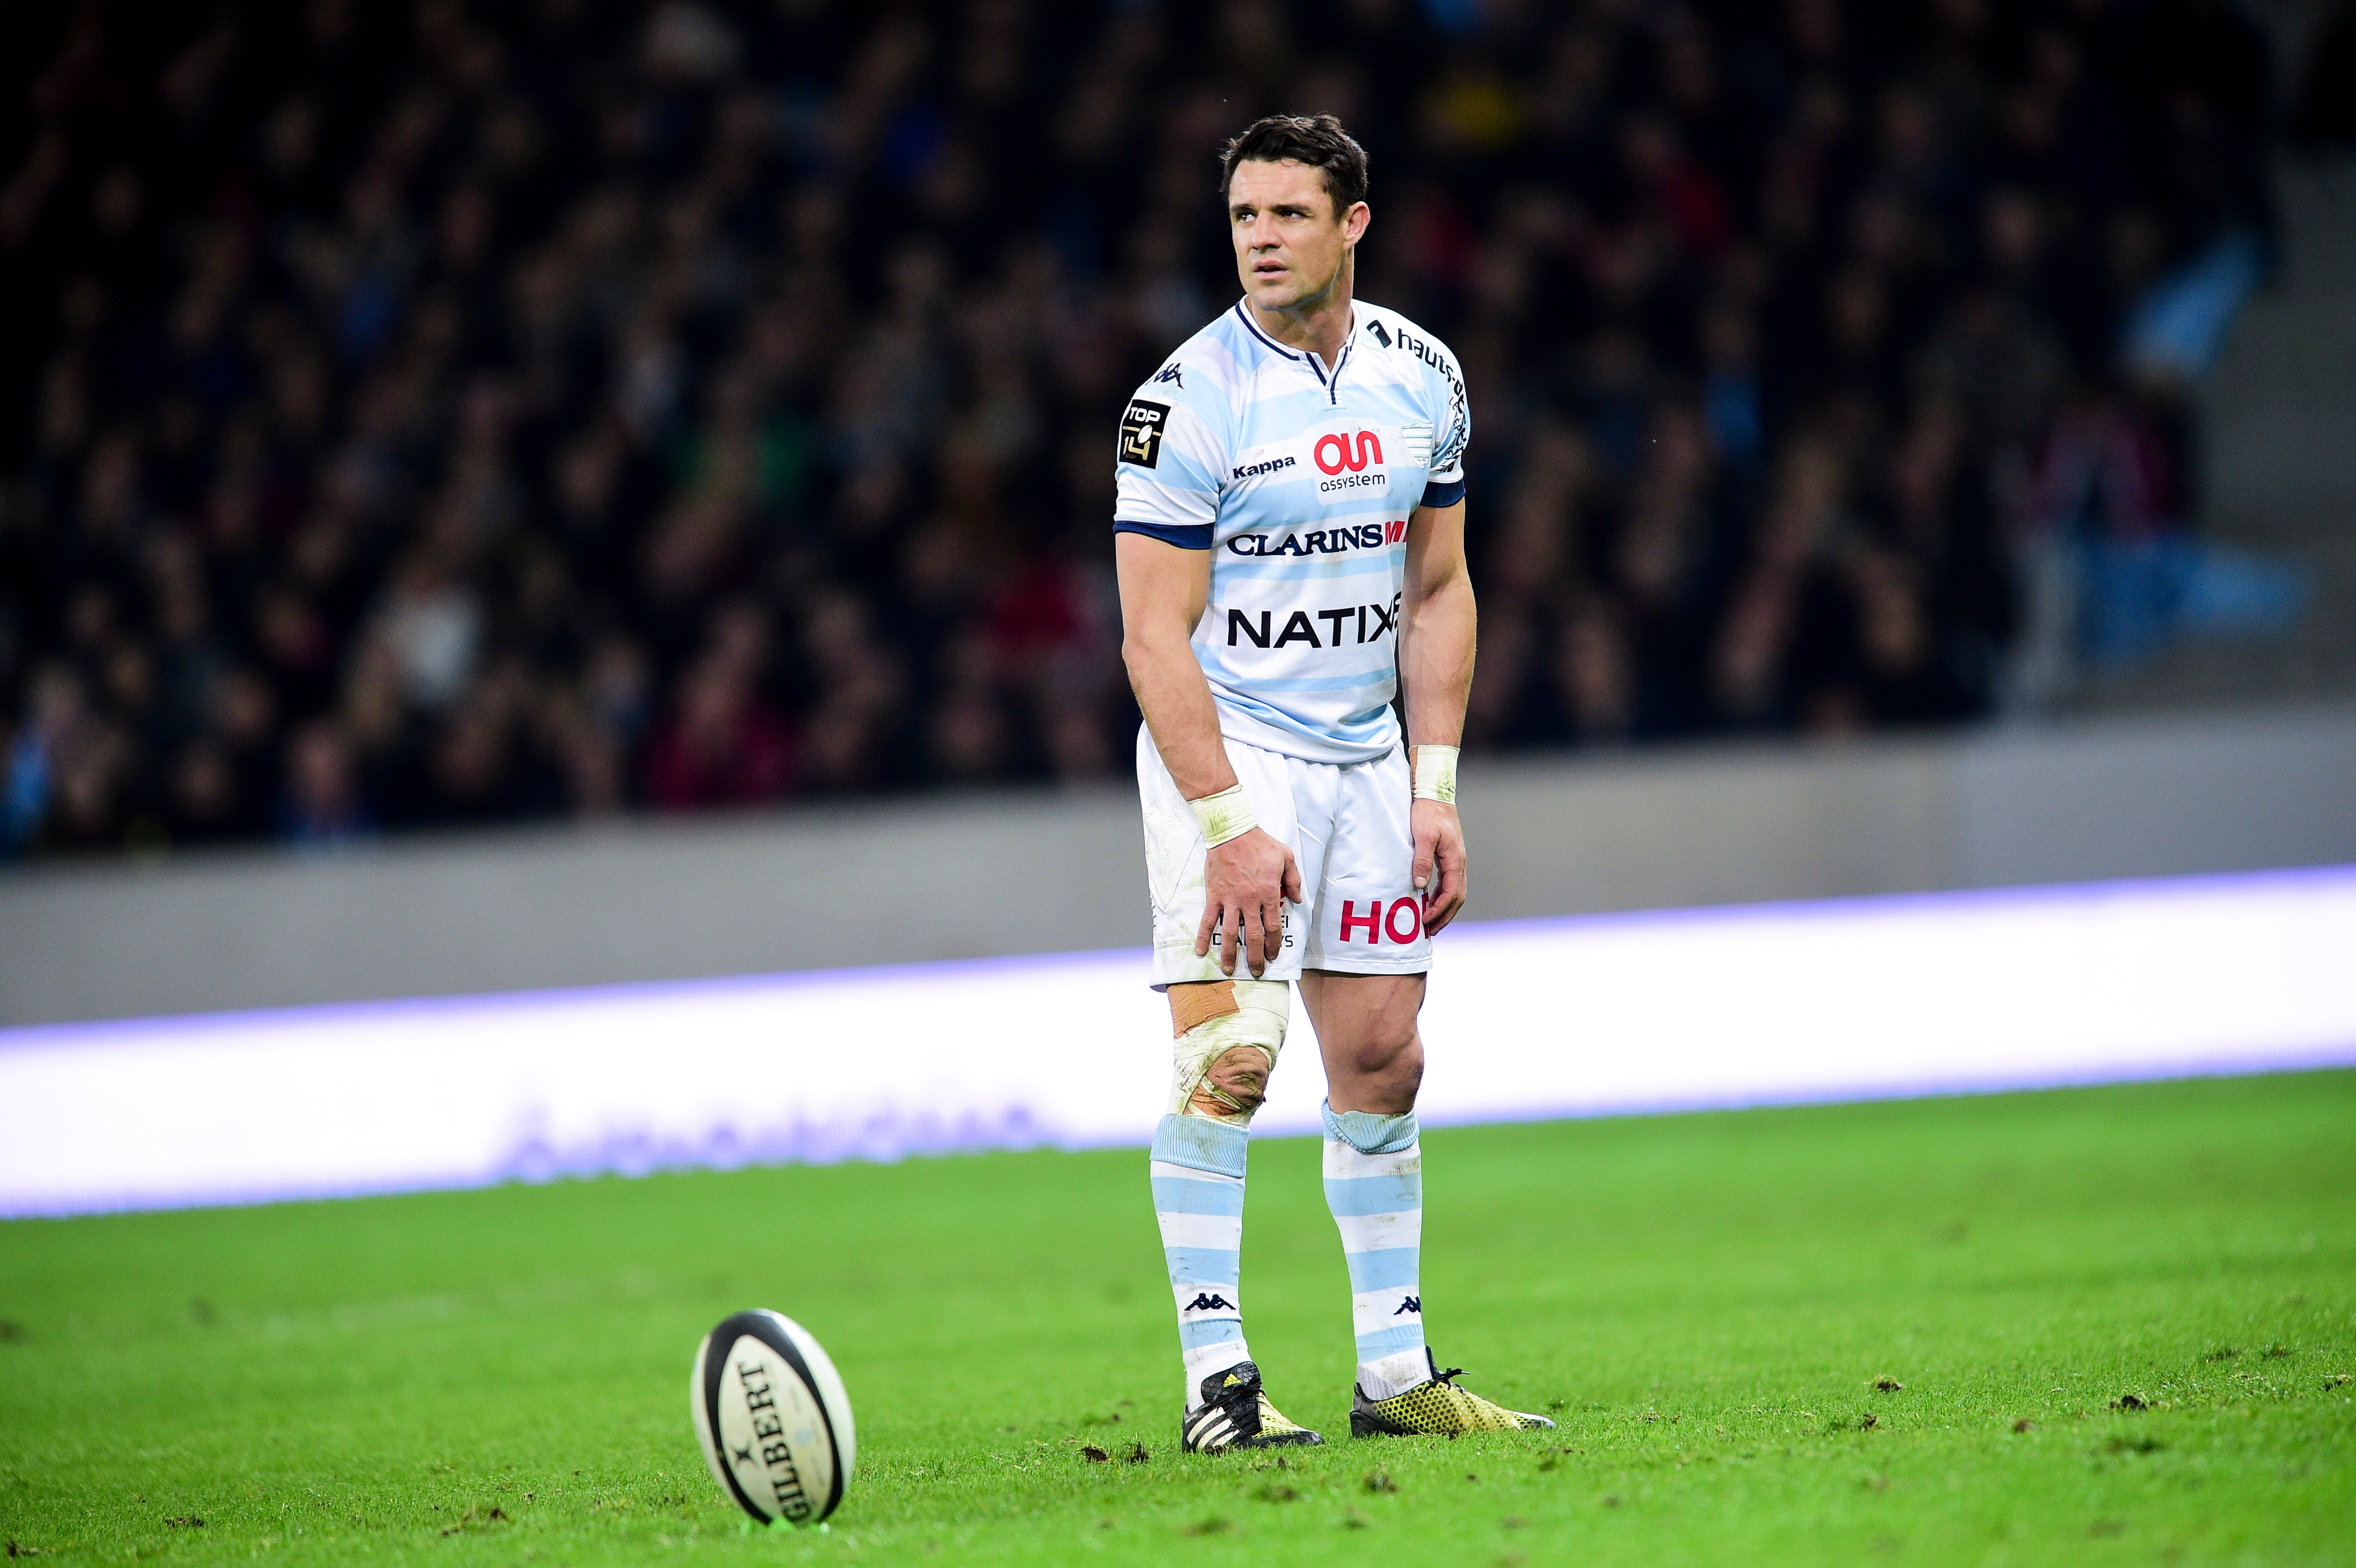 Racing 92 contradict Dan Carter's agent: 'He did not have TUE exception